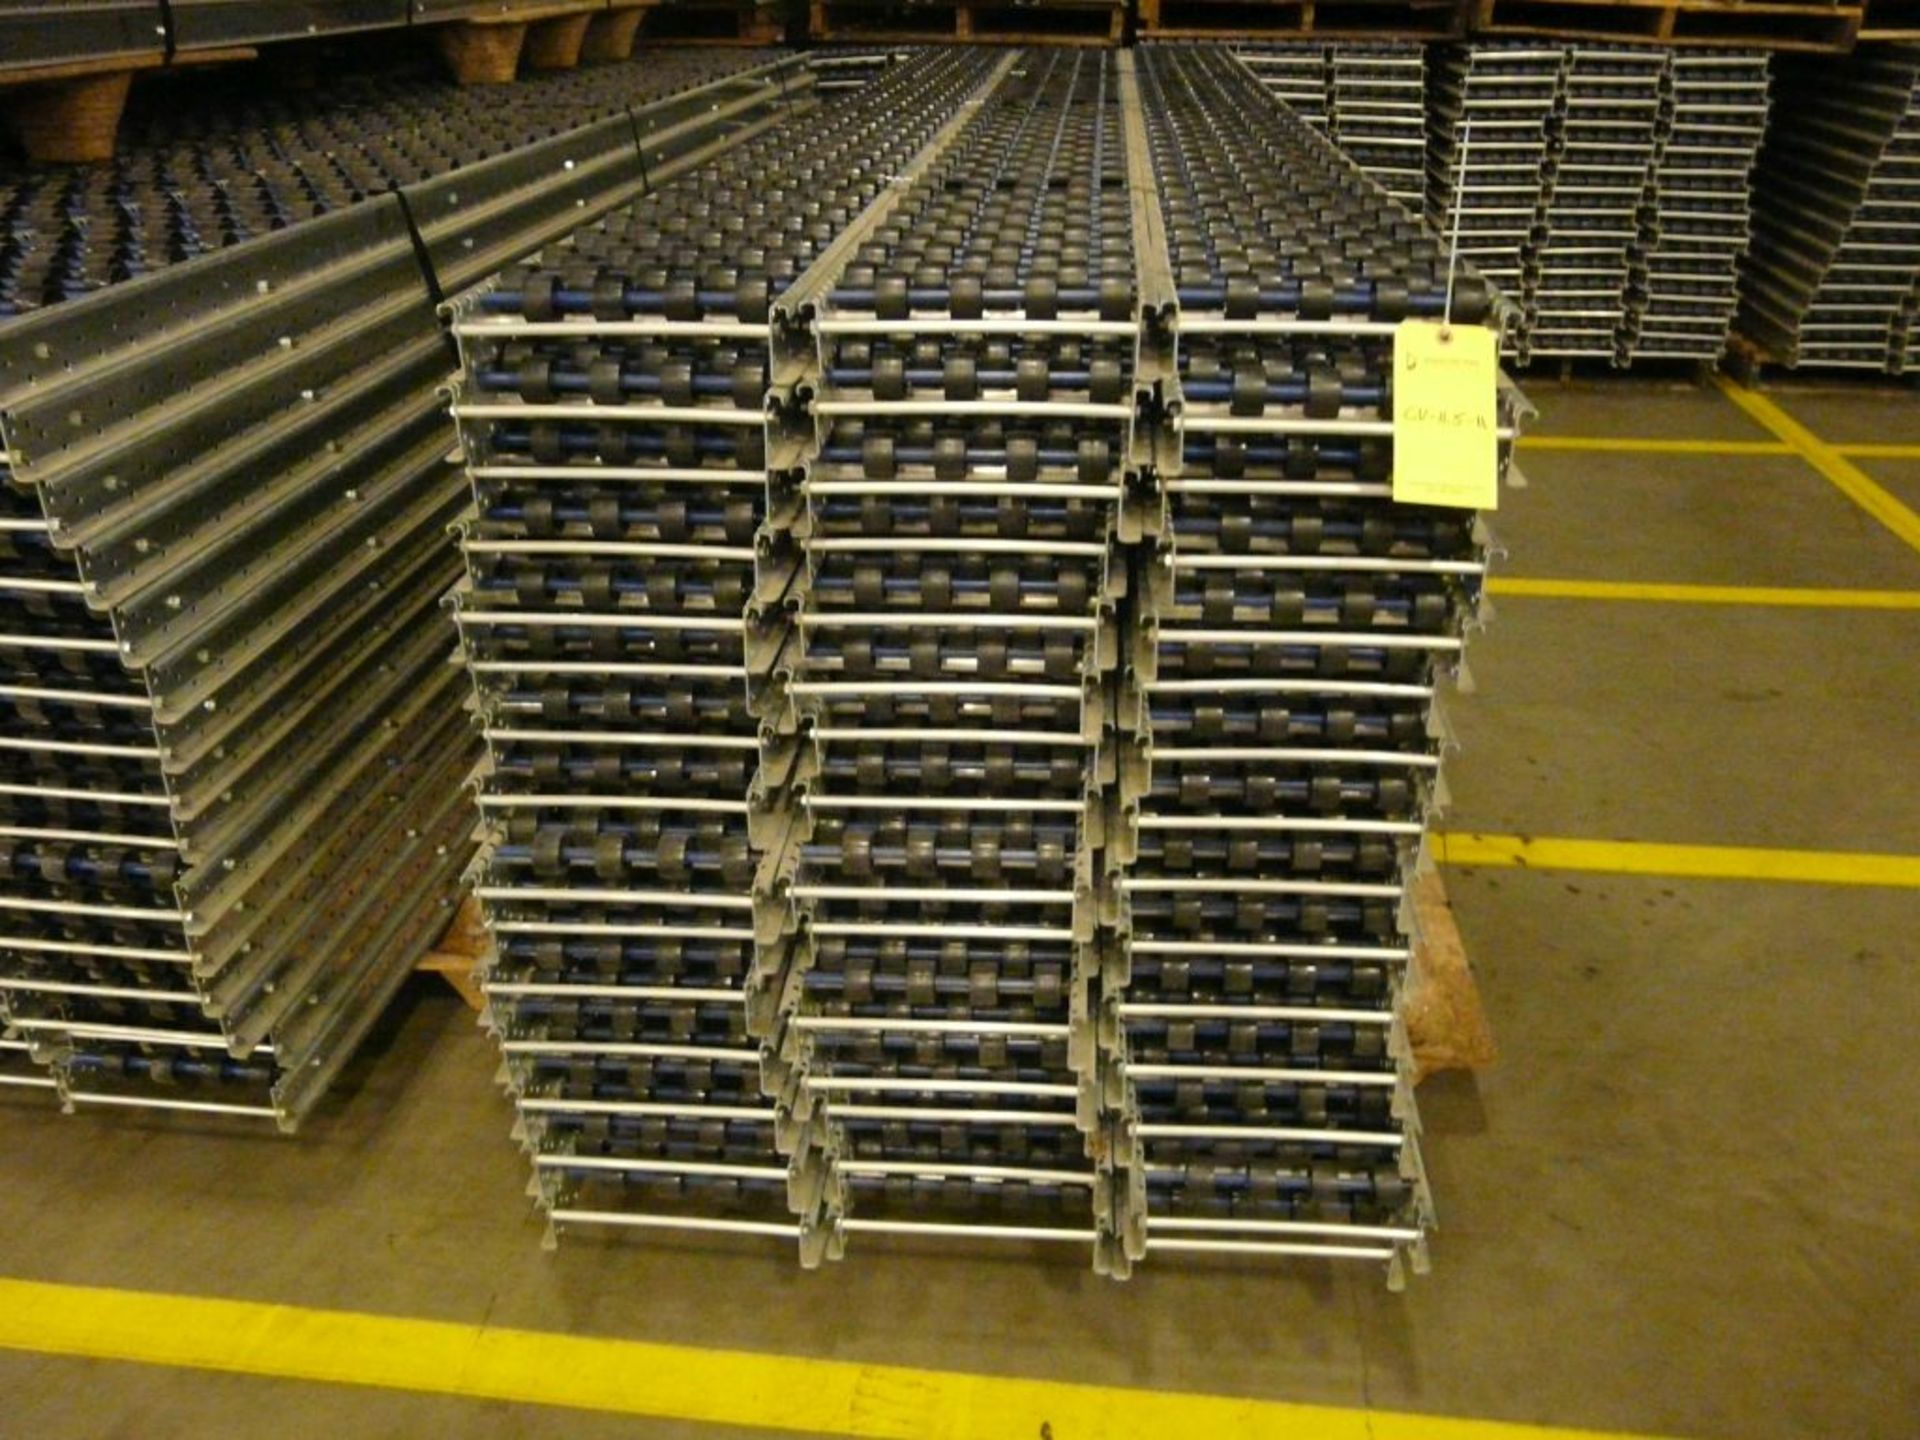 Lot of (90) SpanTrack Wheelbed Carton Flow Conveyors - 11.5'L x 11"W; Tag: 223635 - $30 Lot - Image 2 of 4